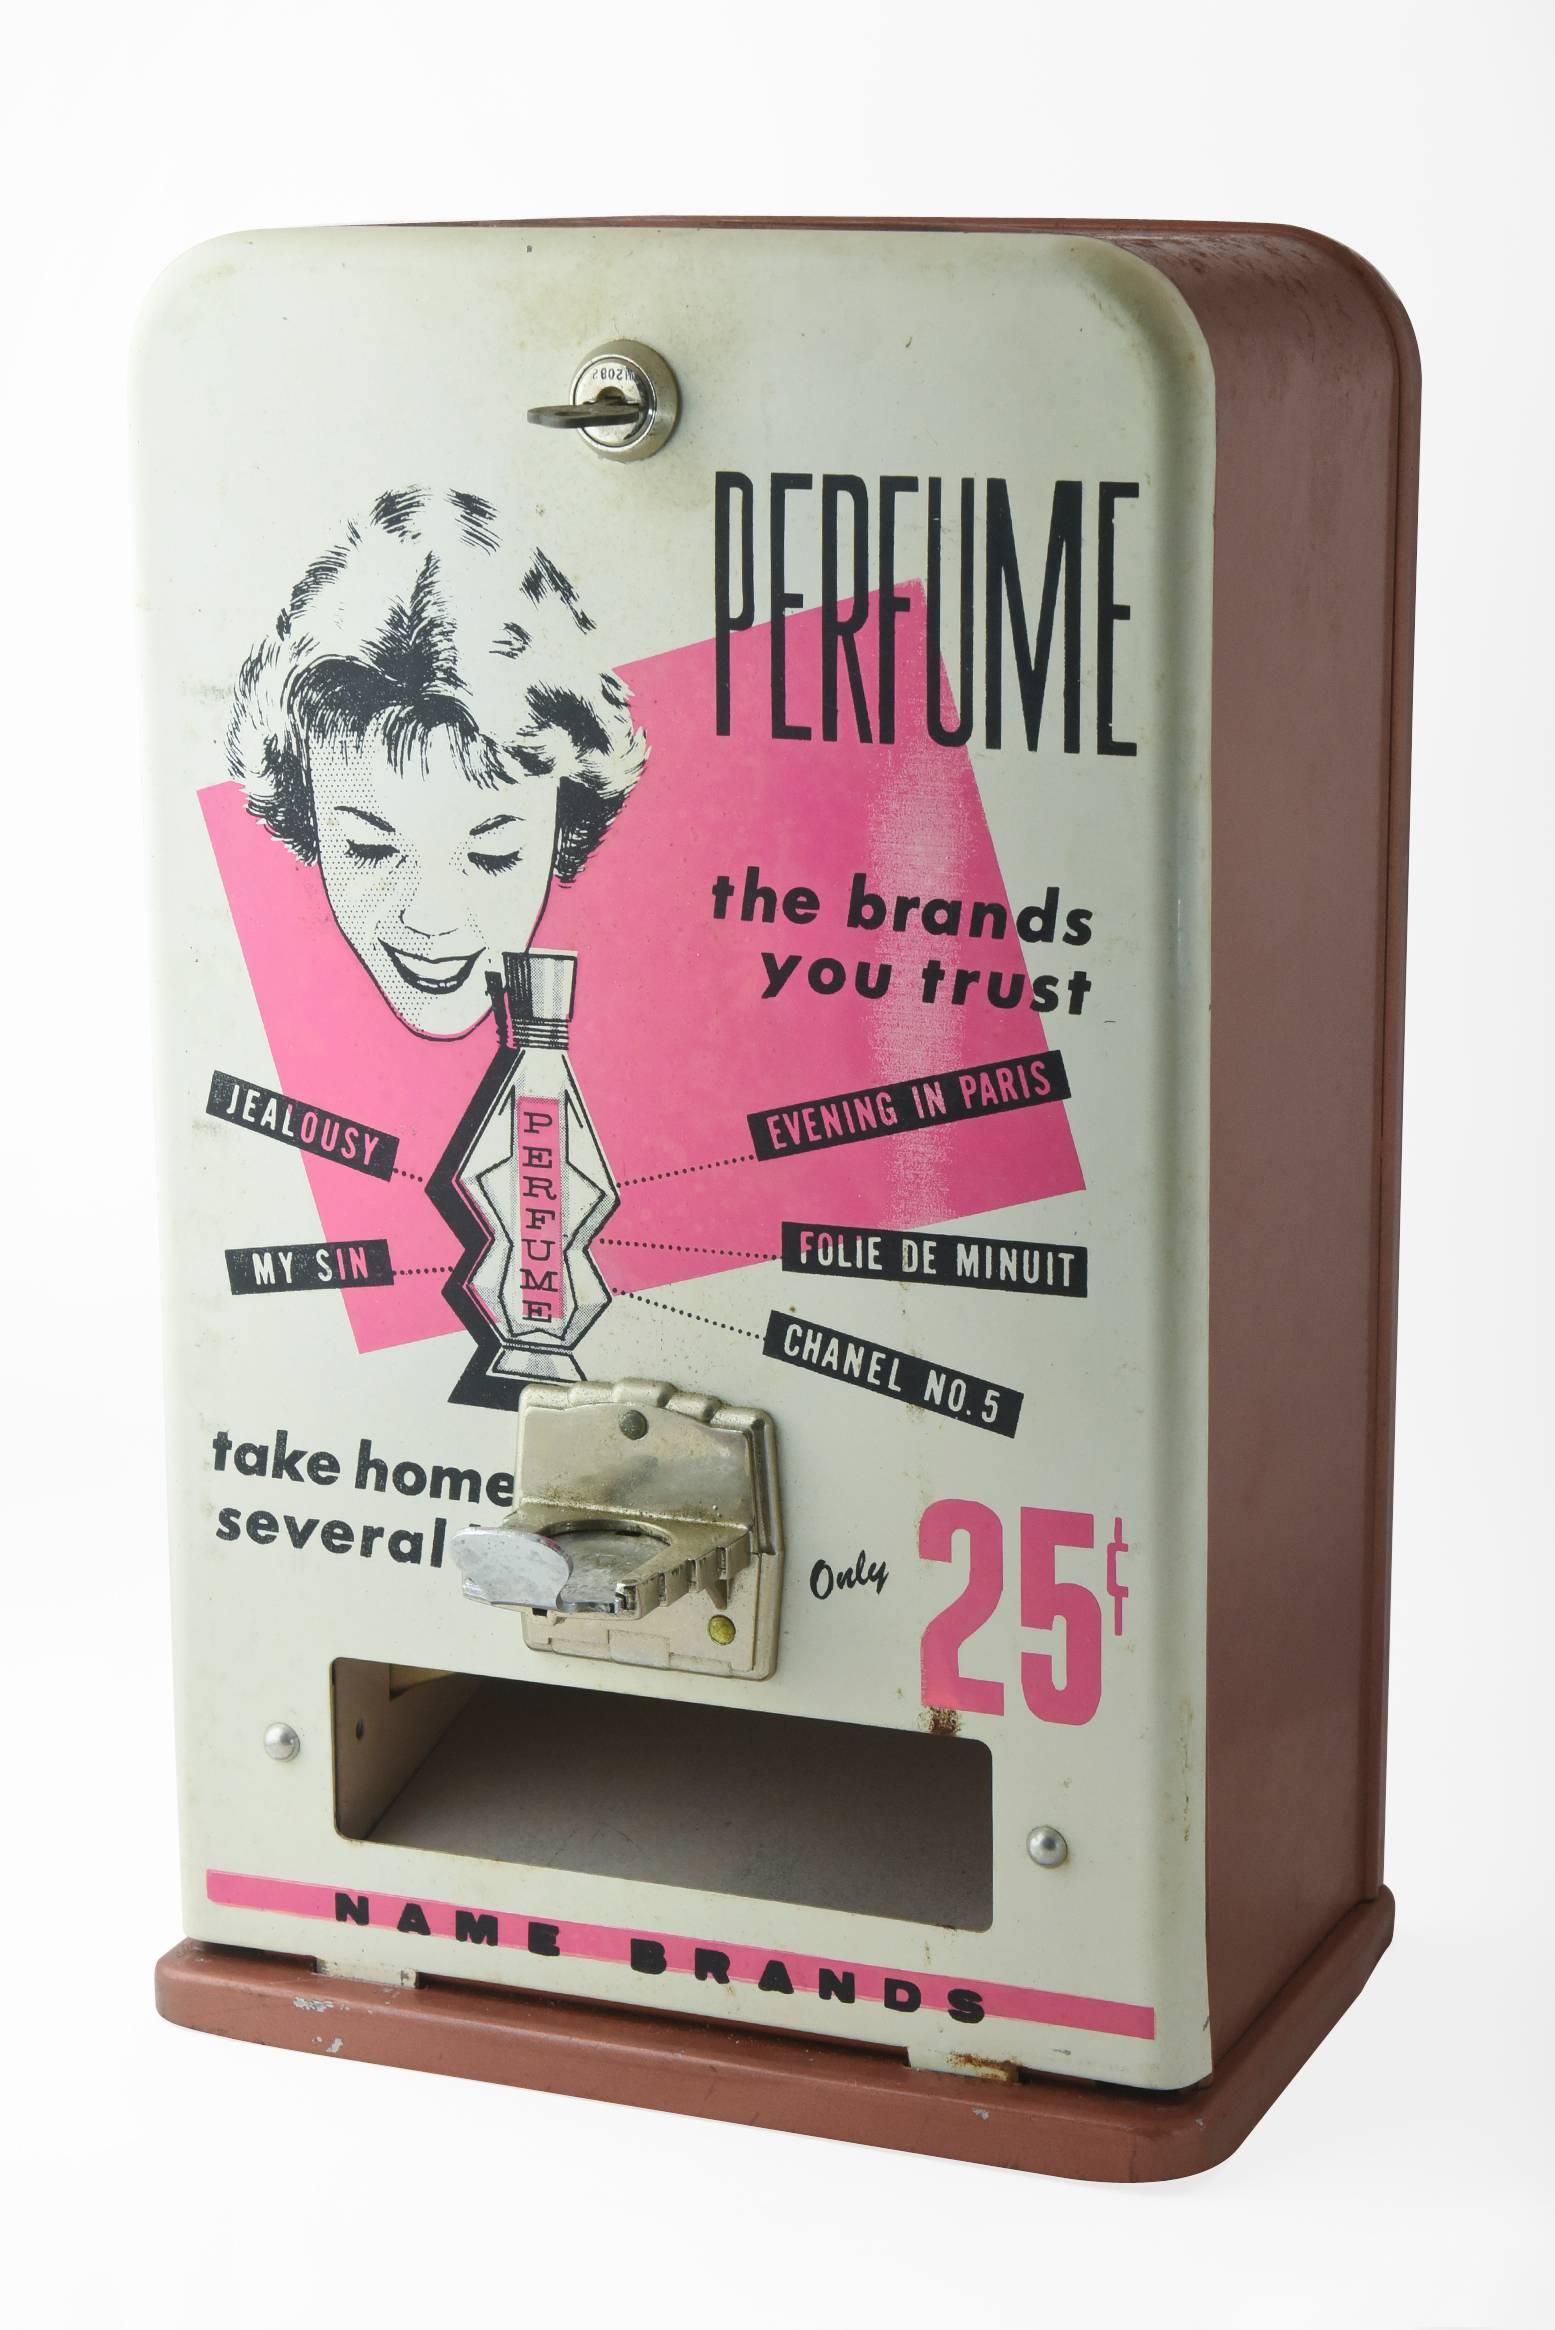 Rare 1950s A. B. T. Manufacturing Co. ladies perfume 25C quarter vending machine / sign

This fantastic vintage 1950s perfume vending machine has wonderful graphics of a woman's face and a perfume bottle. Unlike most perfume dispensers, this one